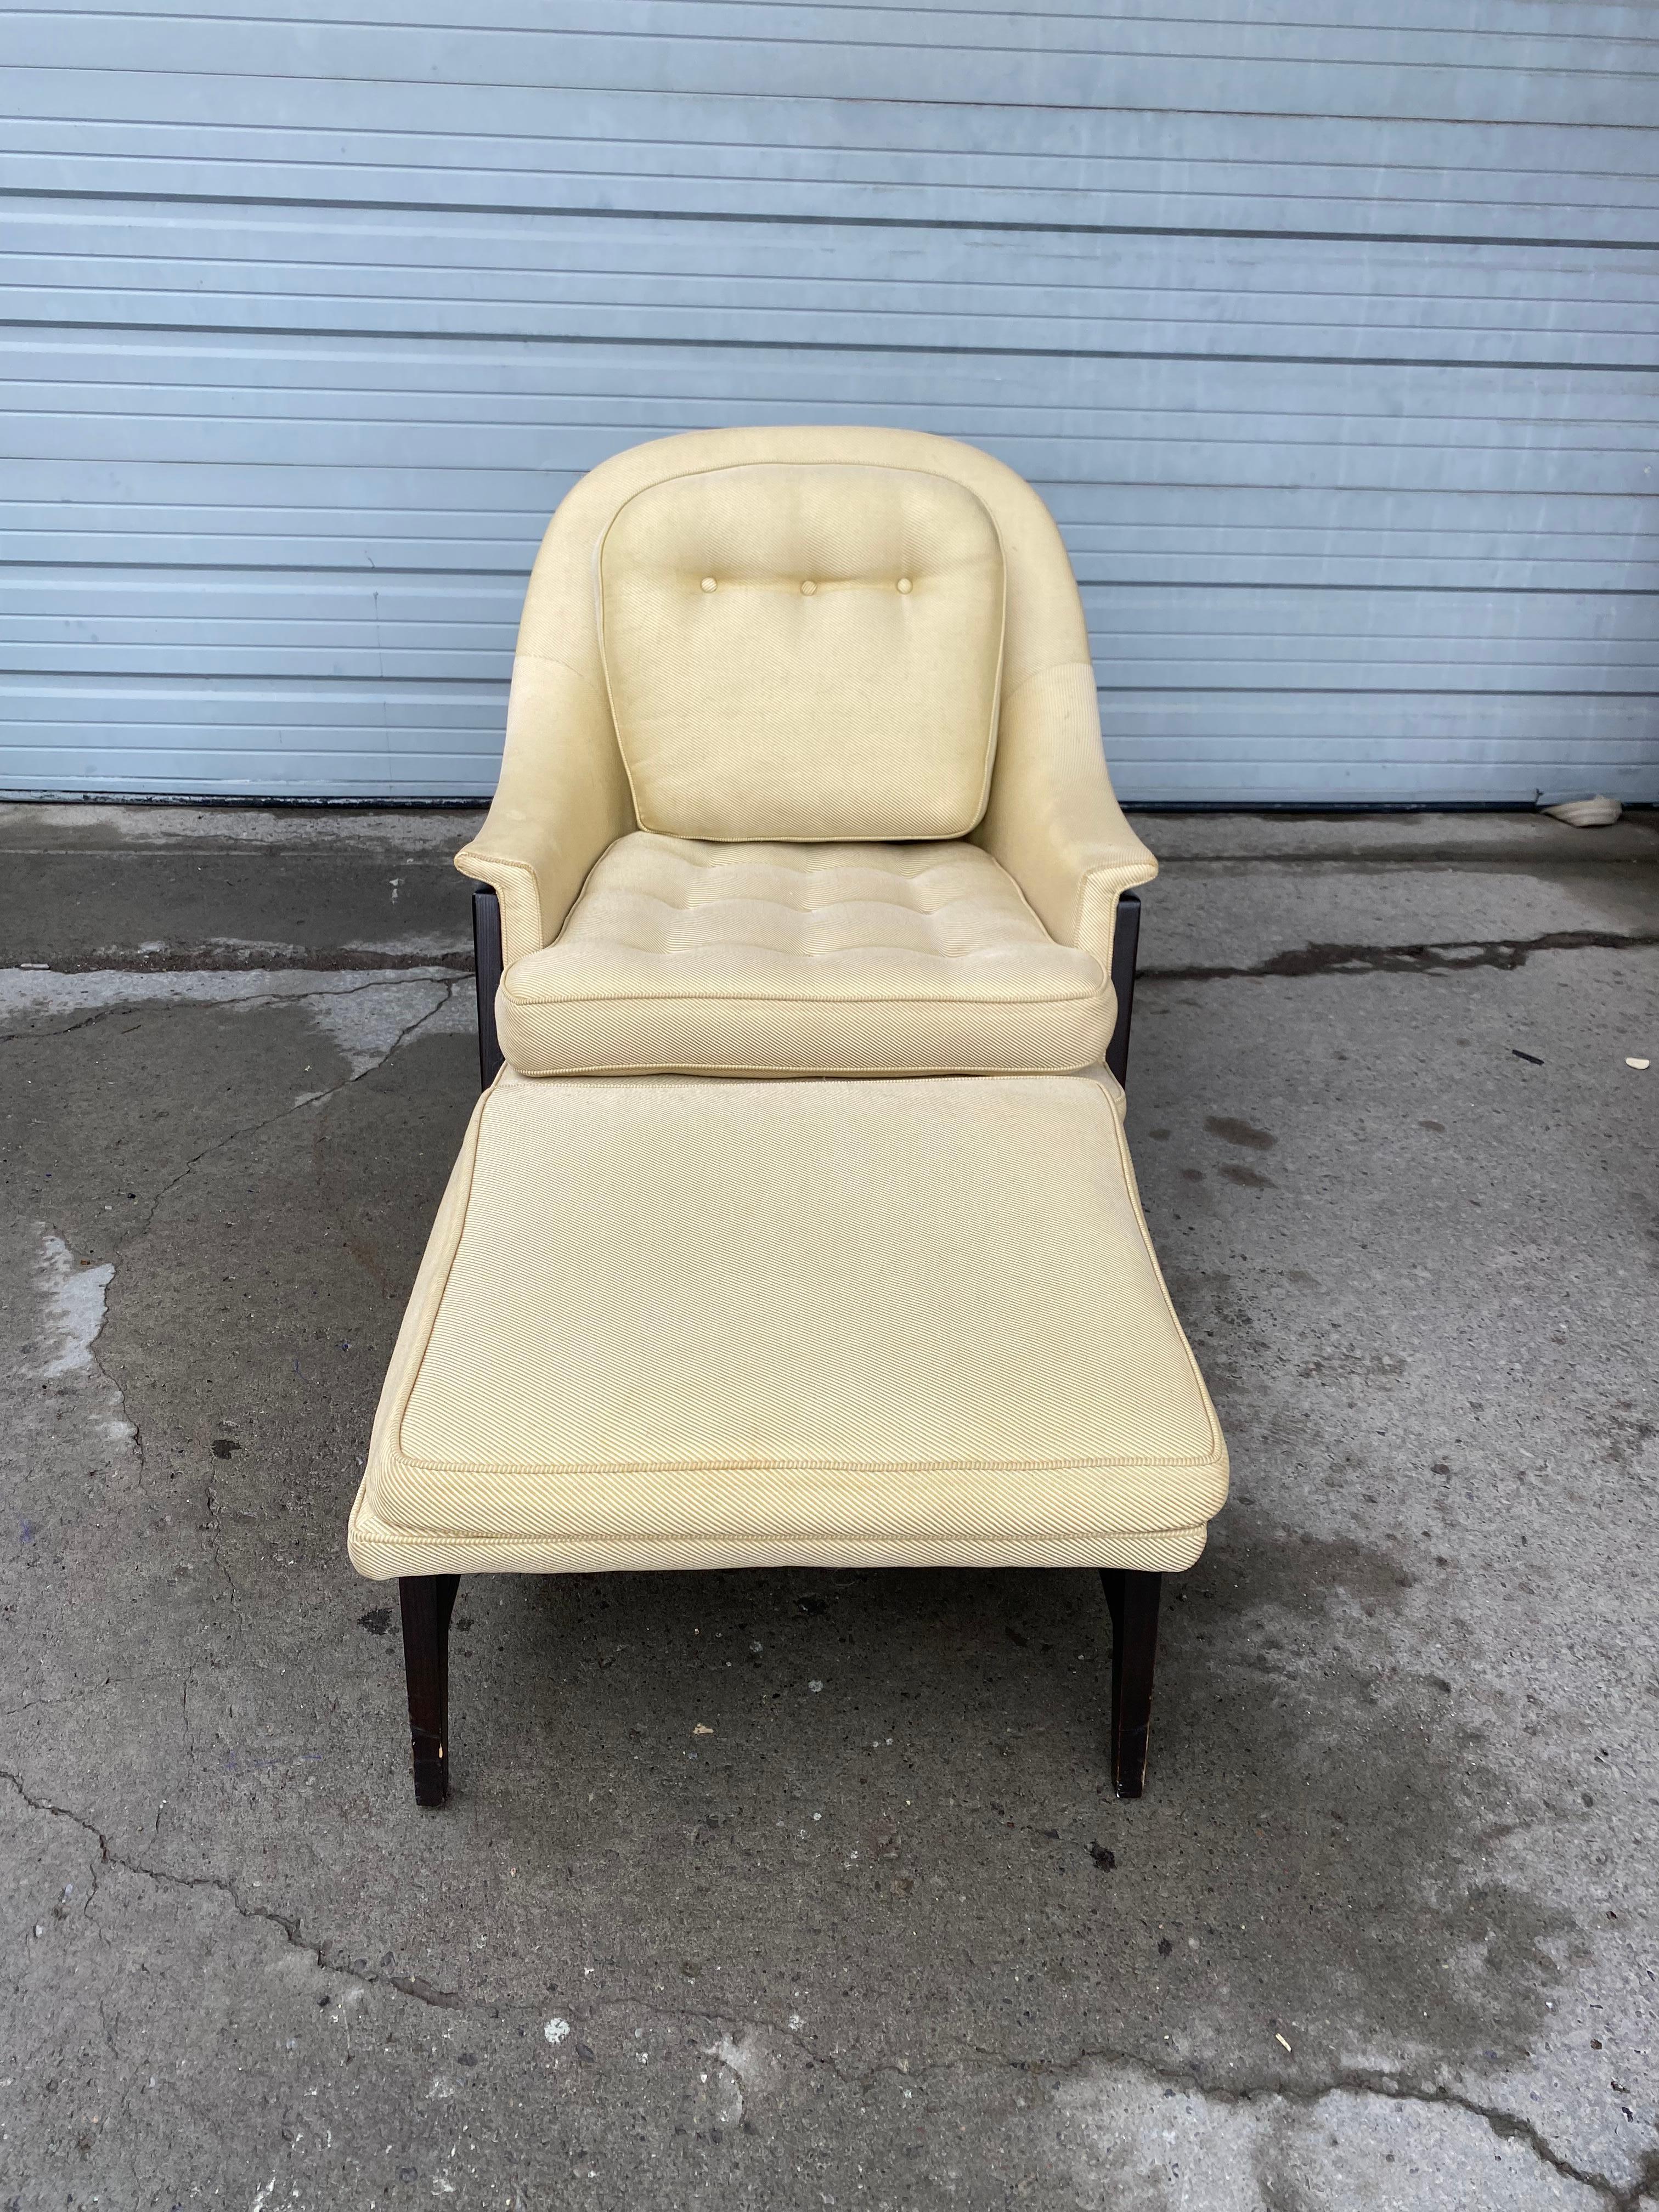 Edward Wormley  Janus lounge chair and ottoman   Model 5701, Dunbar, 1957
ash, leather; 33.75 H × 30.5 W × 34 D in; Stitched manufacturer's mark to decking 'Dunbar'. Upholstery manufacturer's label to seat 'Edward Wormley for Dunbar Furniture